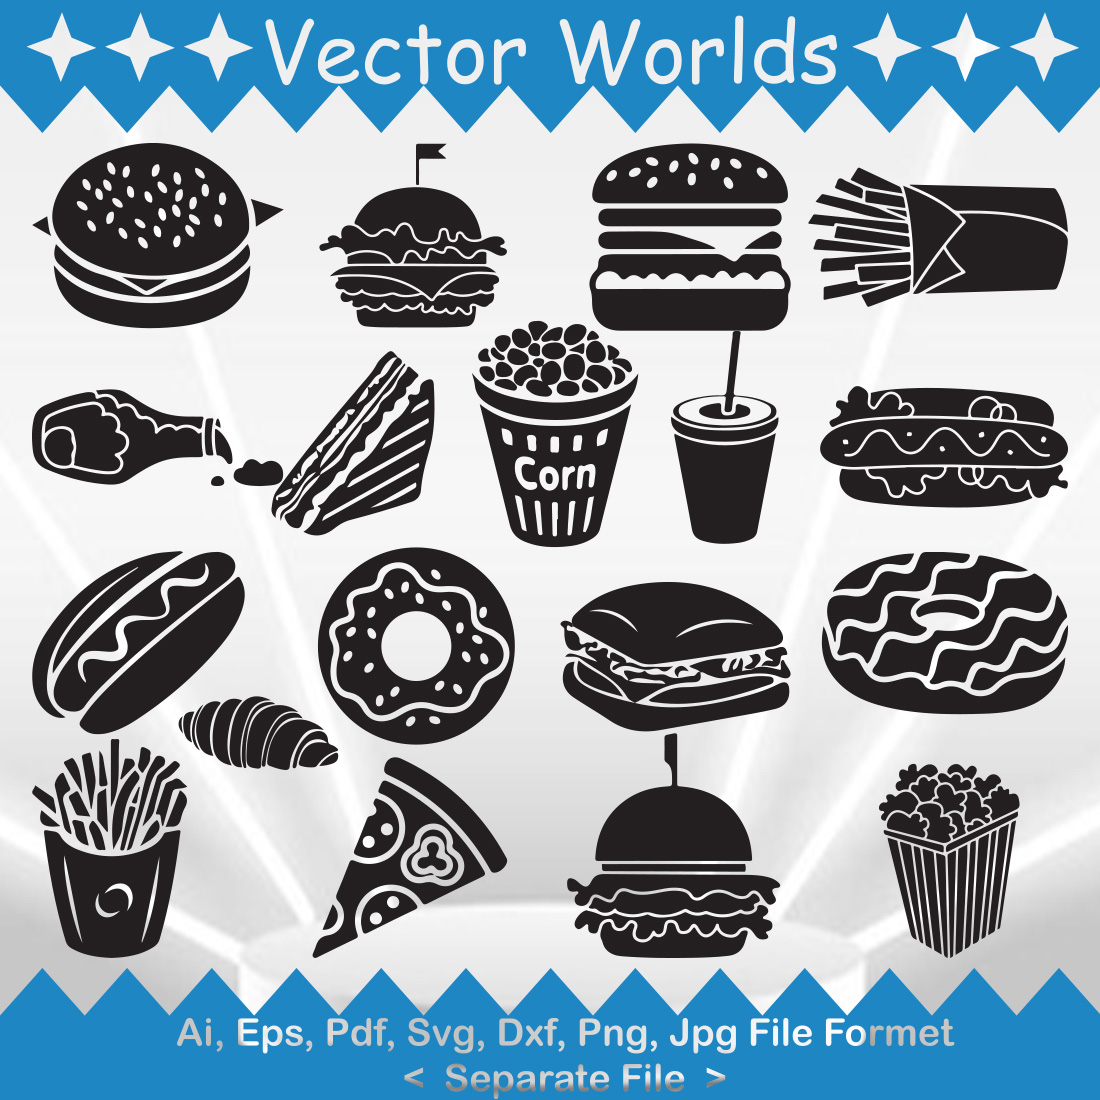 Pack of vector adorable fast food silhouette images.